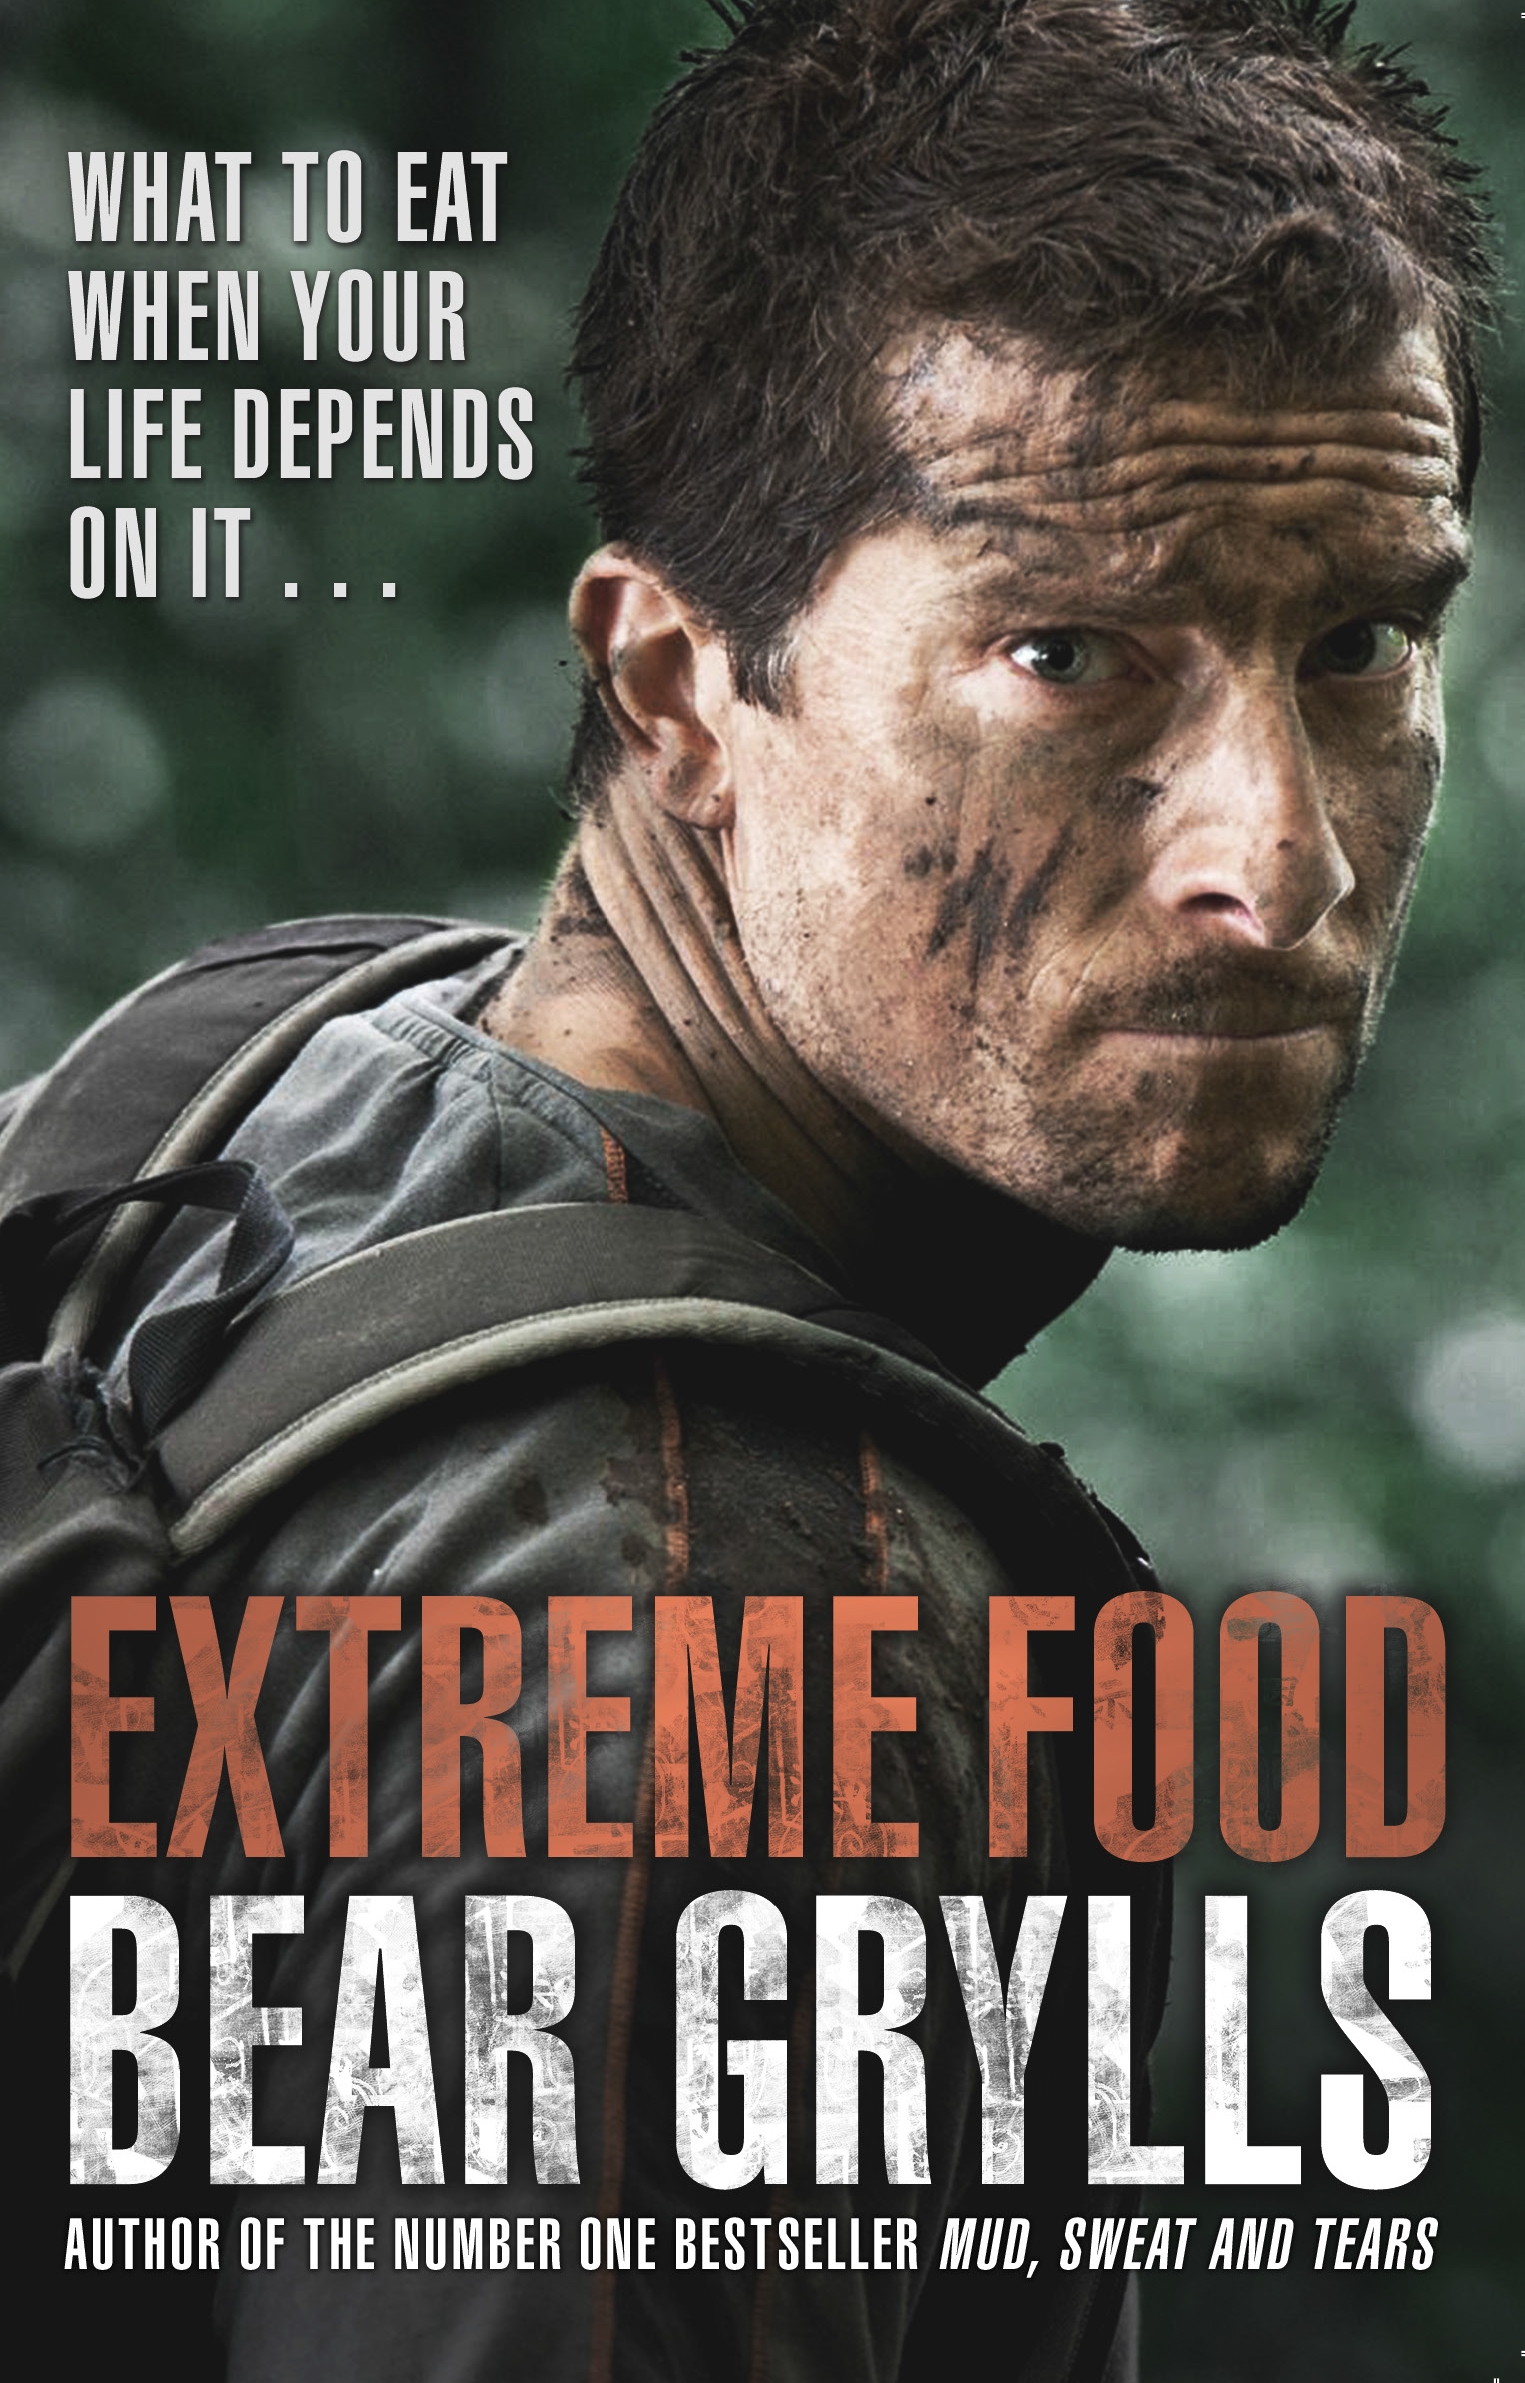 Extreme Food - What to eat when your life depends on it... by Bear Grylls -  Penguin Books Australia